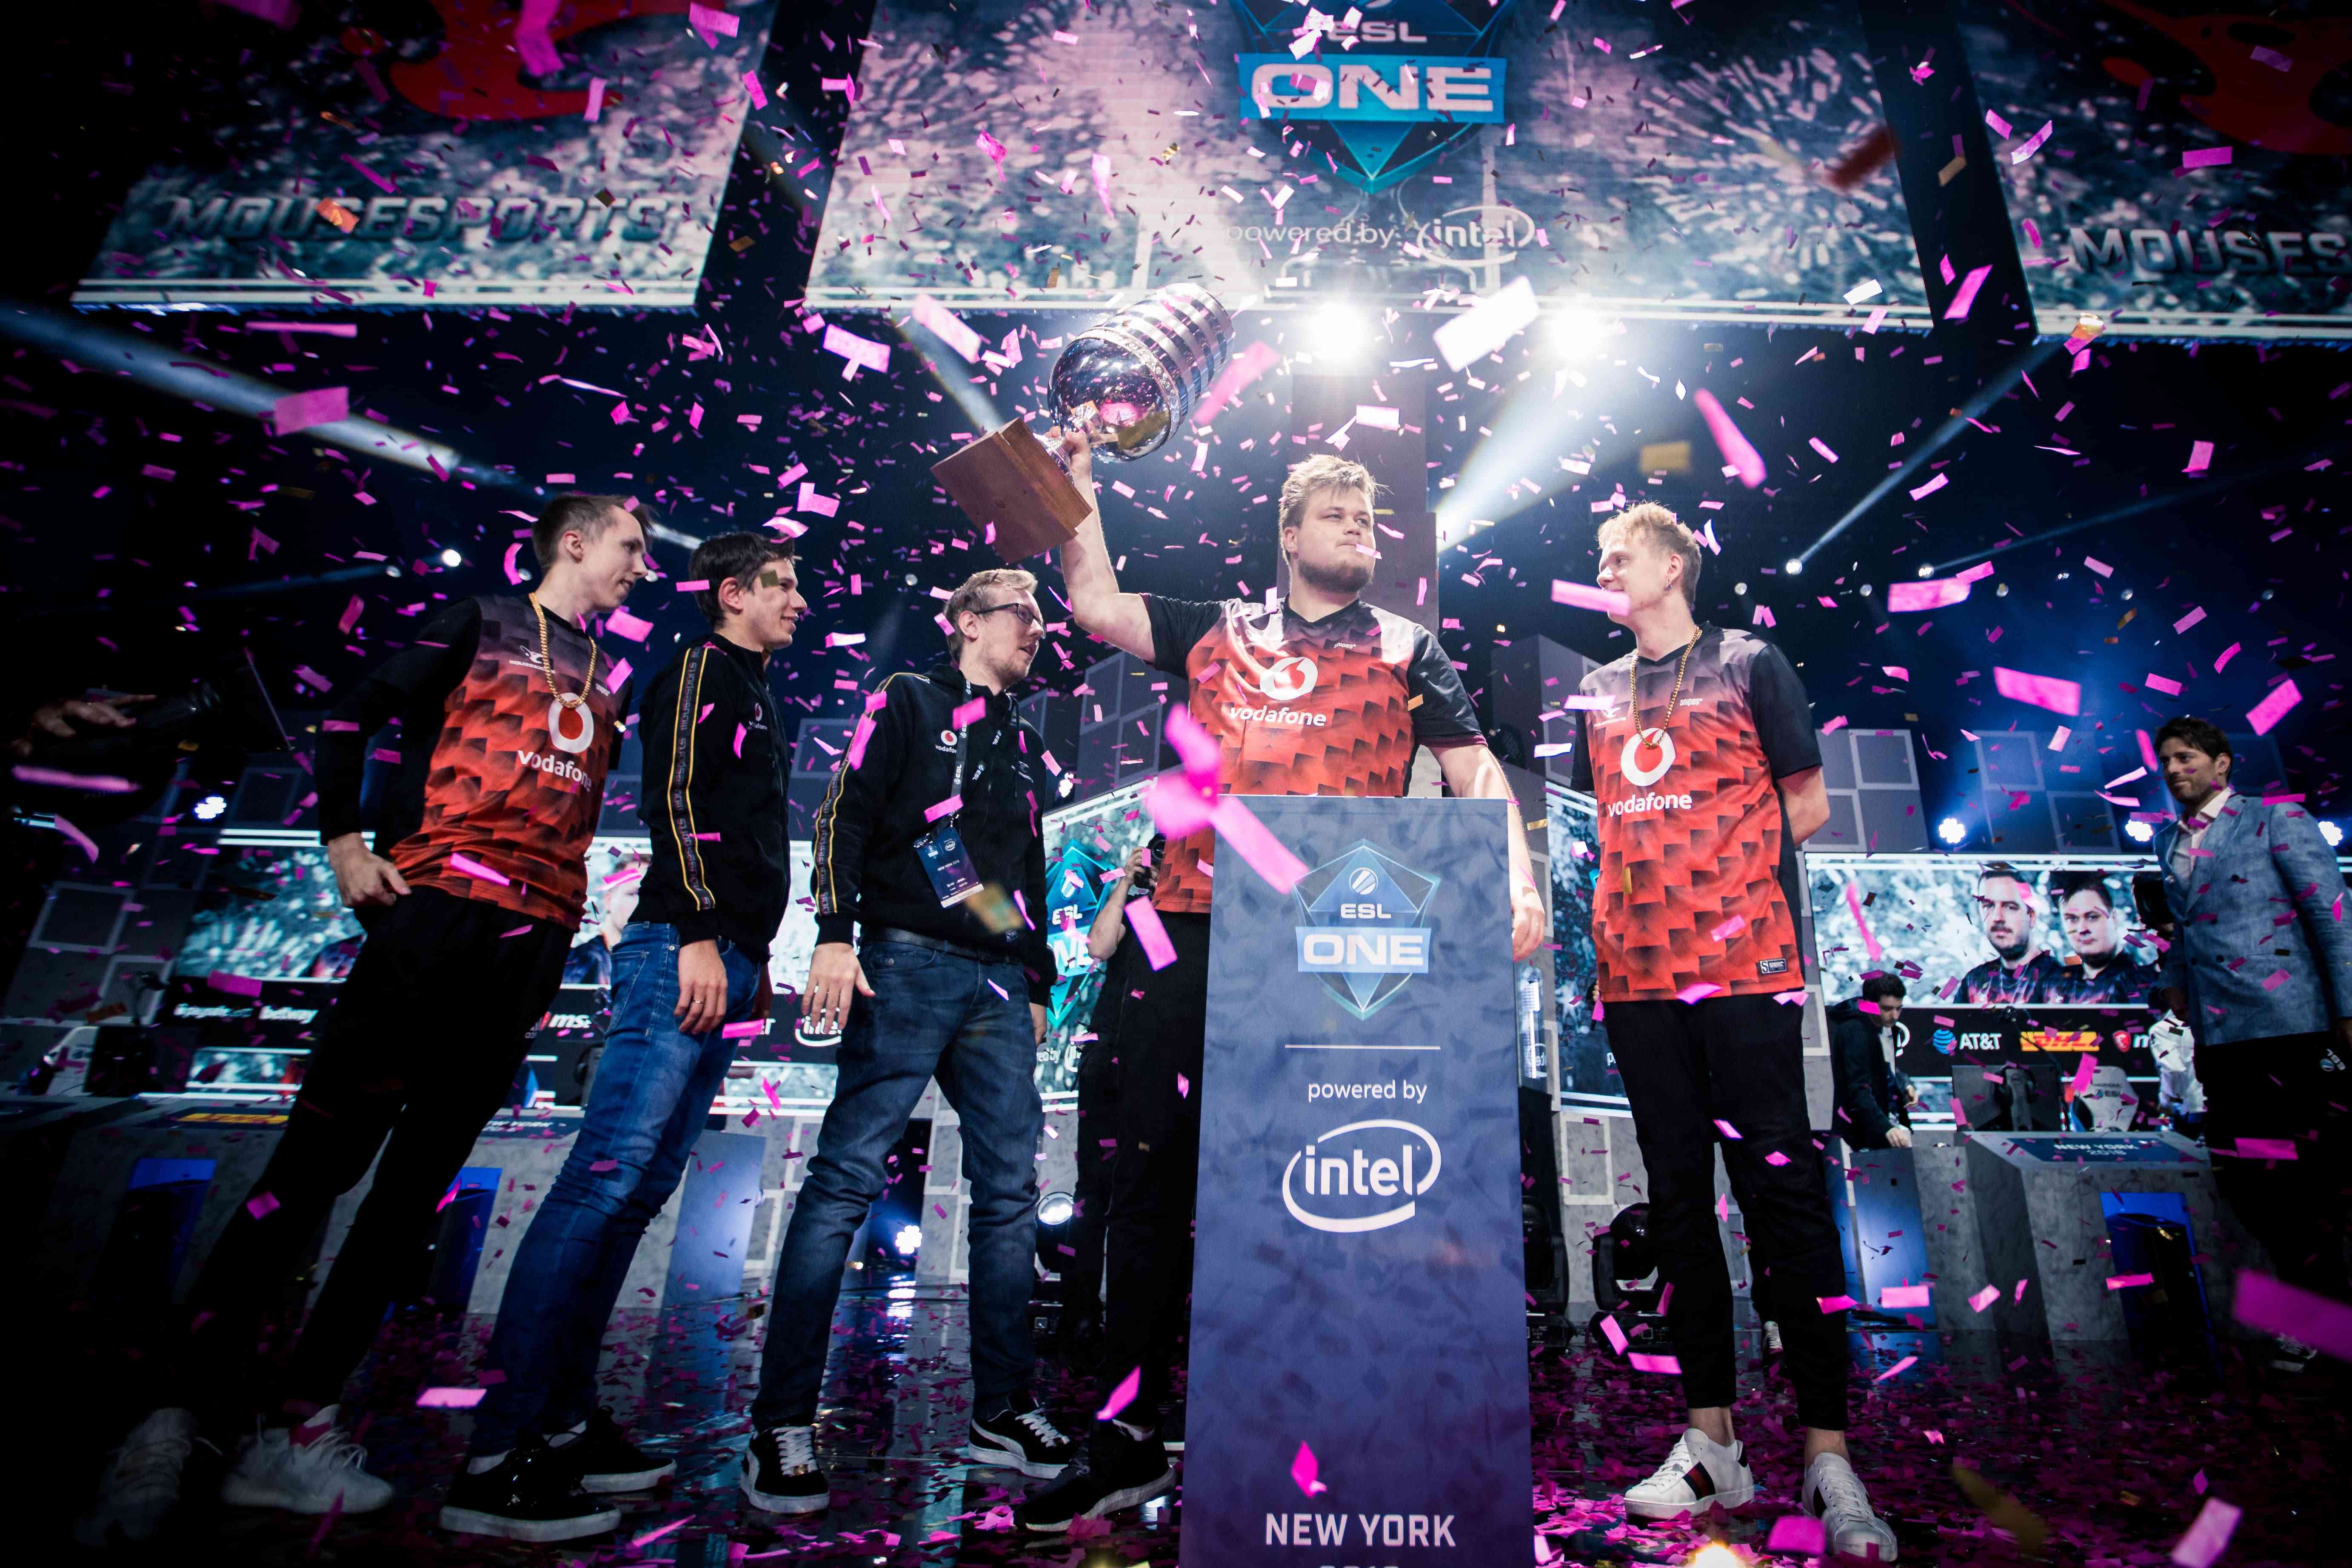 Snax secured a title at ESL One New York 2018 mere days before he was kicked from MOUZ, his last tier-one team (Image Credits: ESL | Helena Kristiansson)